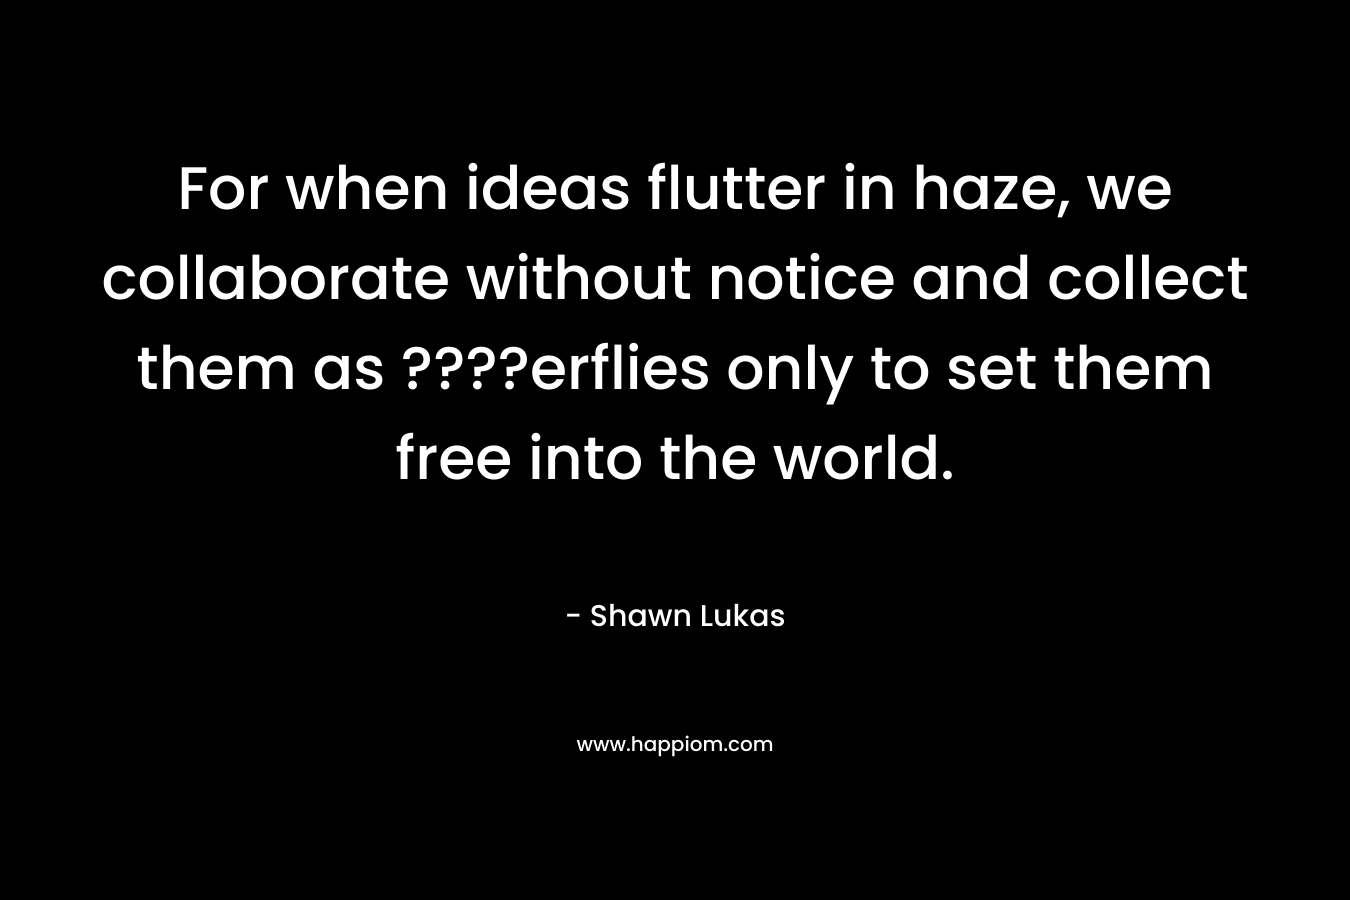 For when ideas flutter in haze, we collaborate without notice and collect them as ????erflies only to set them free into the world. – Shawn Lukas